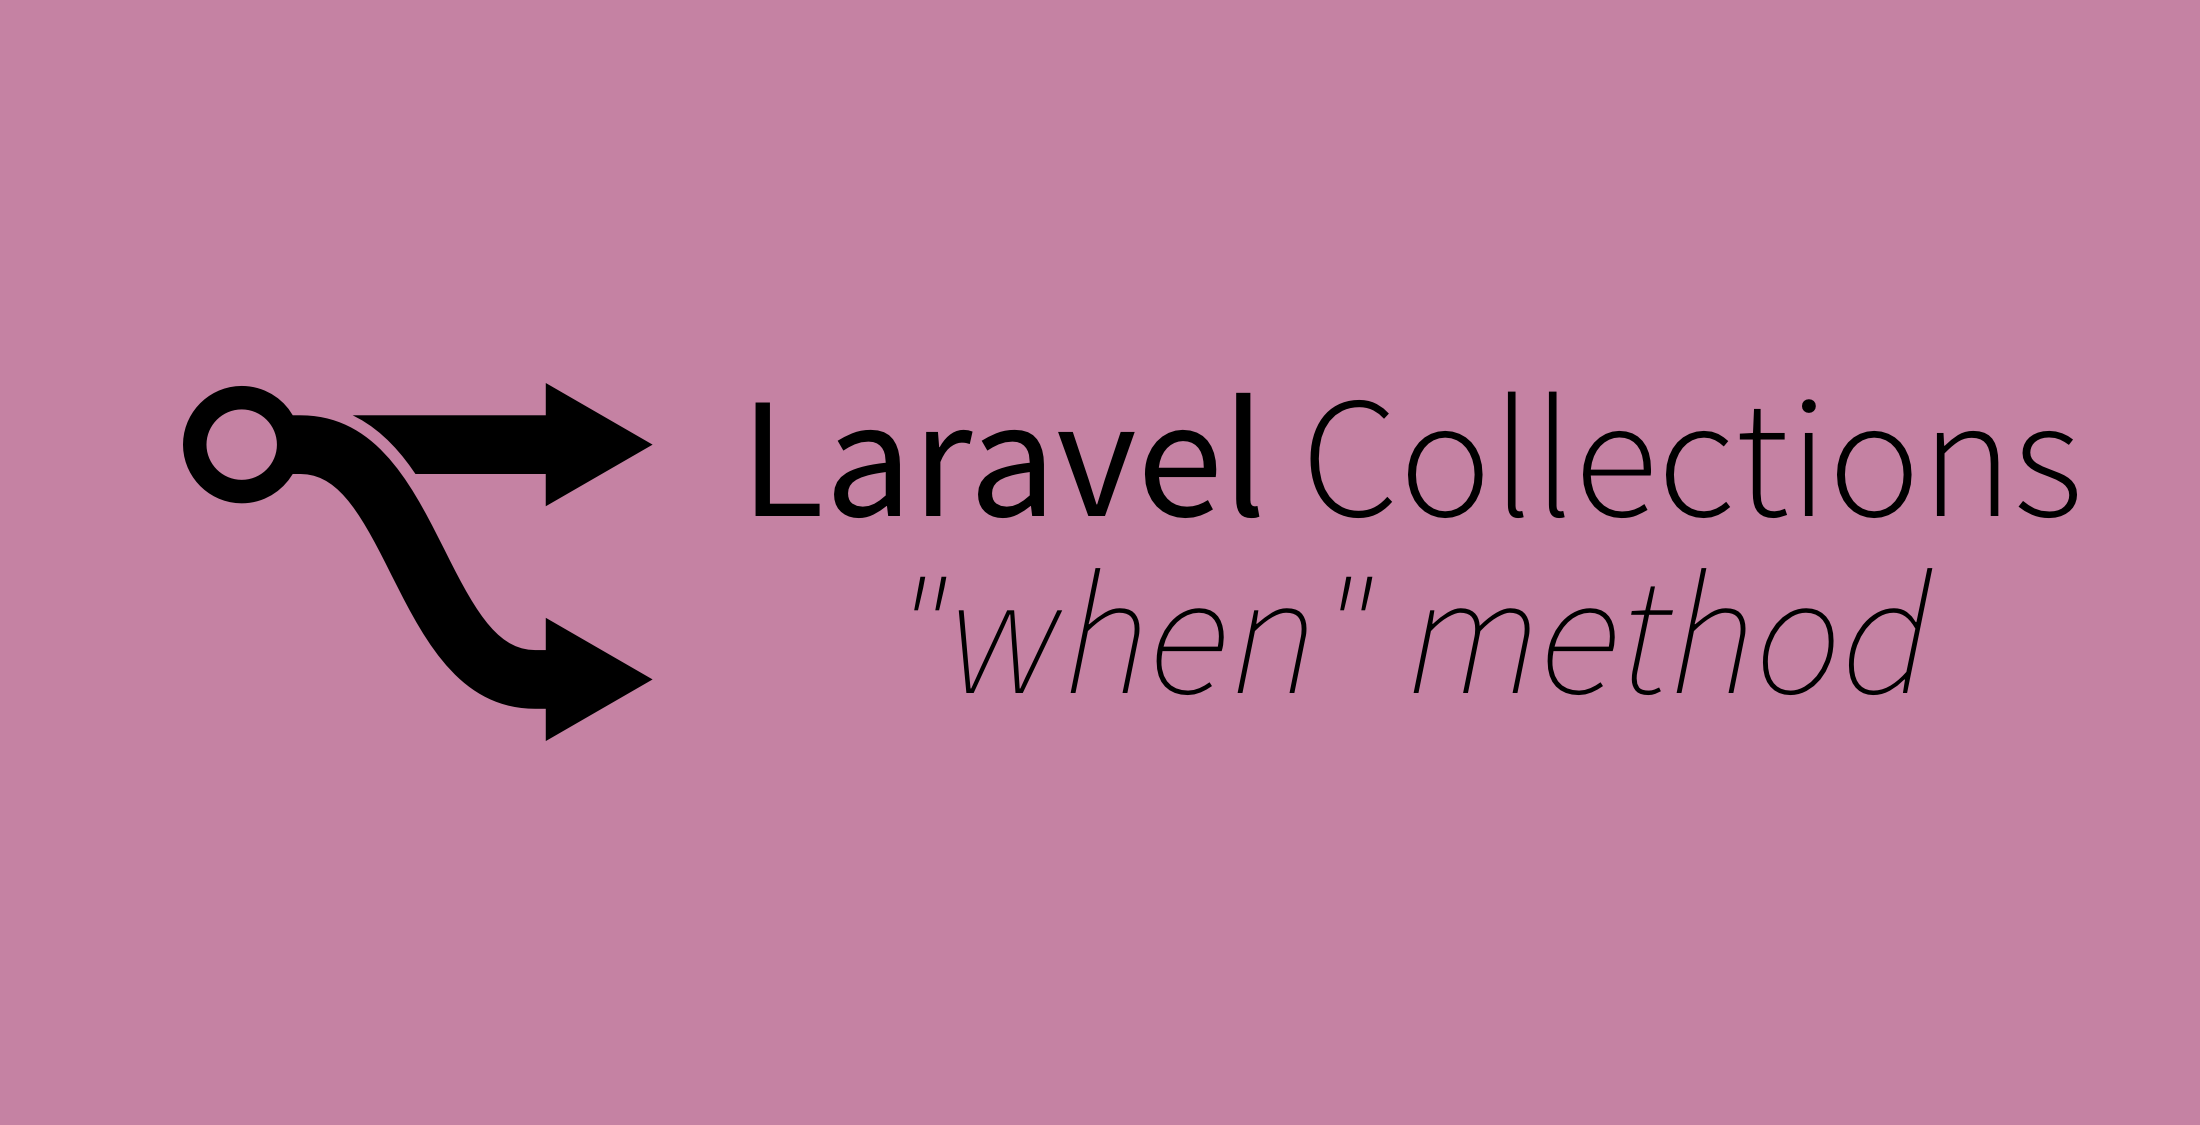 Laravel Collections “when” Method image